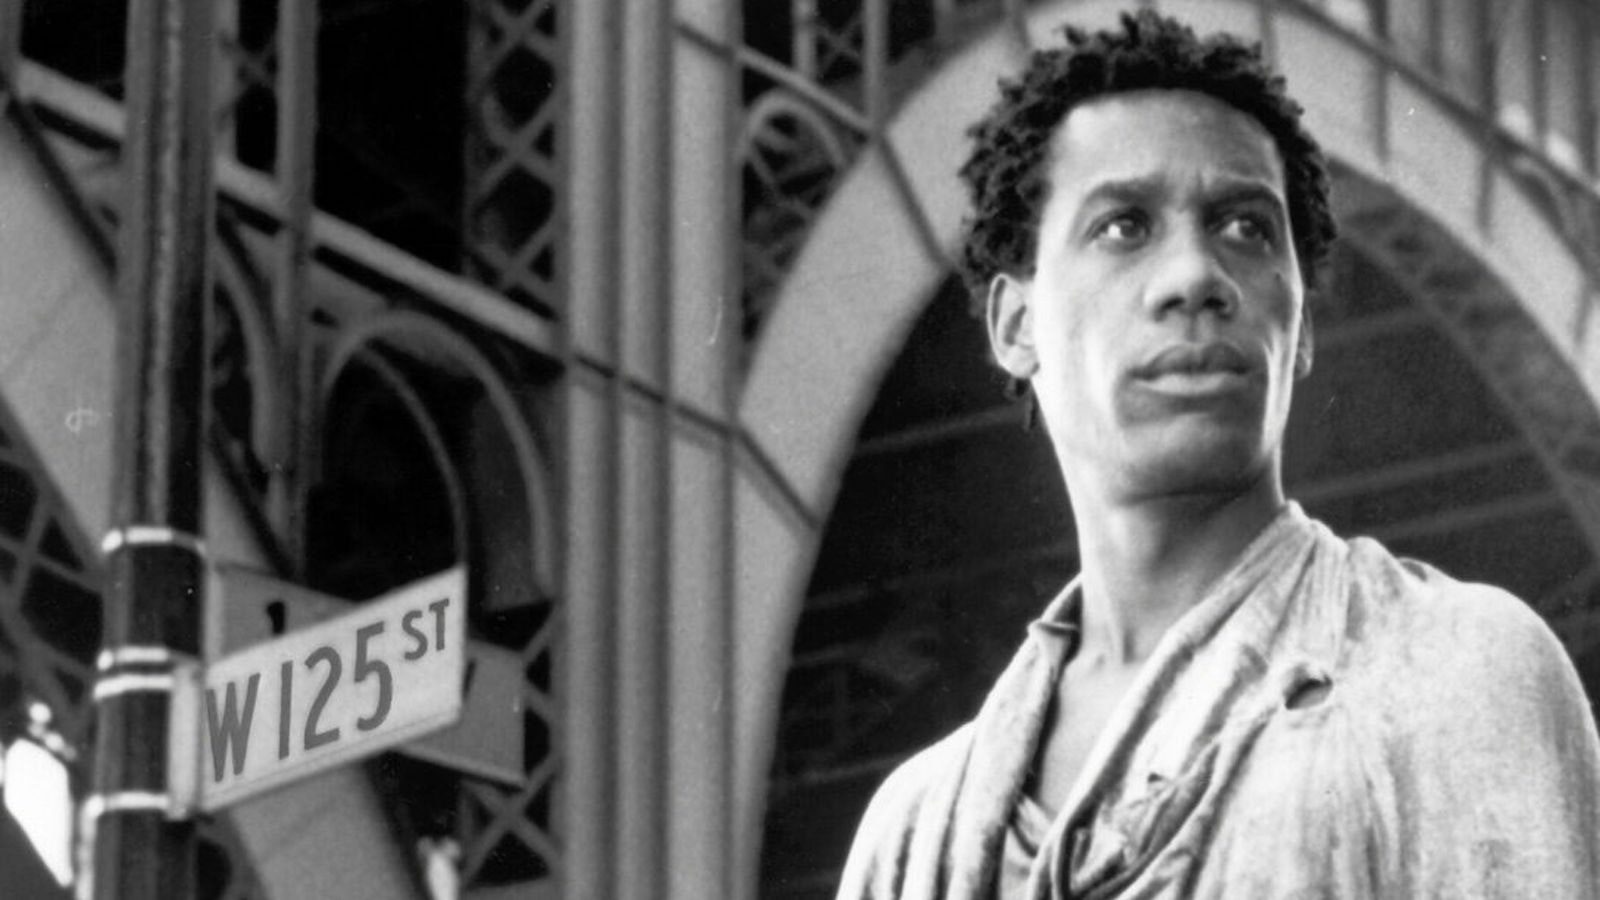 Brother From Another Planet (1984)
Directed by John Sayles
Shown: Joe Morton (as the Brother)